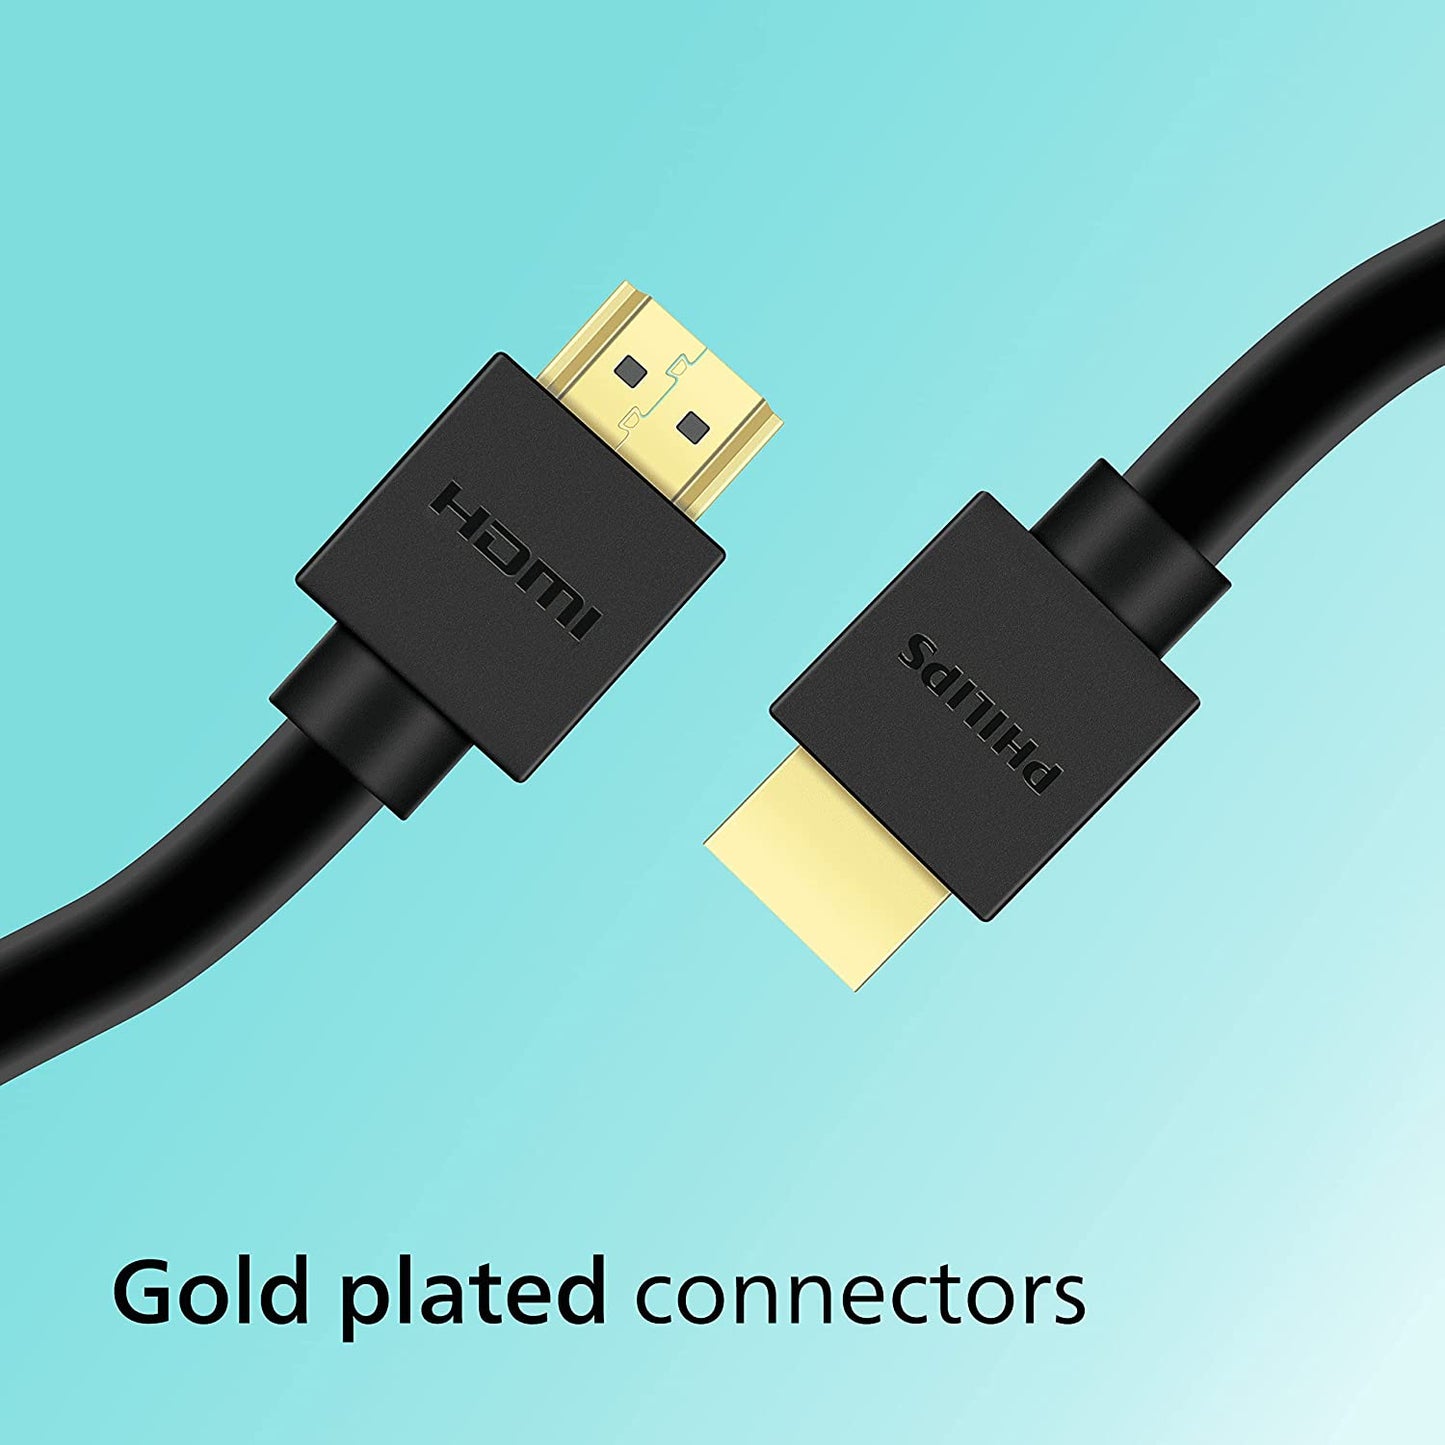 PHILIPS HDMI 2.1 8K Cable Ultra HD High Speed , 48Gbps 60Hz Support Dynamic HDR, Dolby Vision, 3D Support, eARC - 1.5m Cable-HDMI Cable-Philips-computerspace